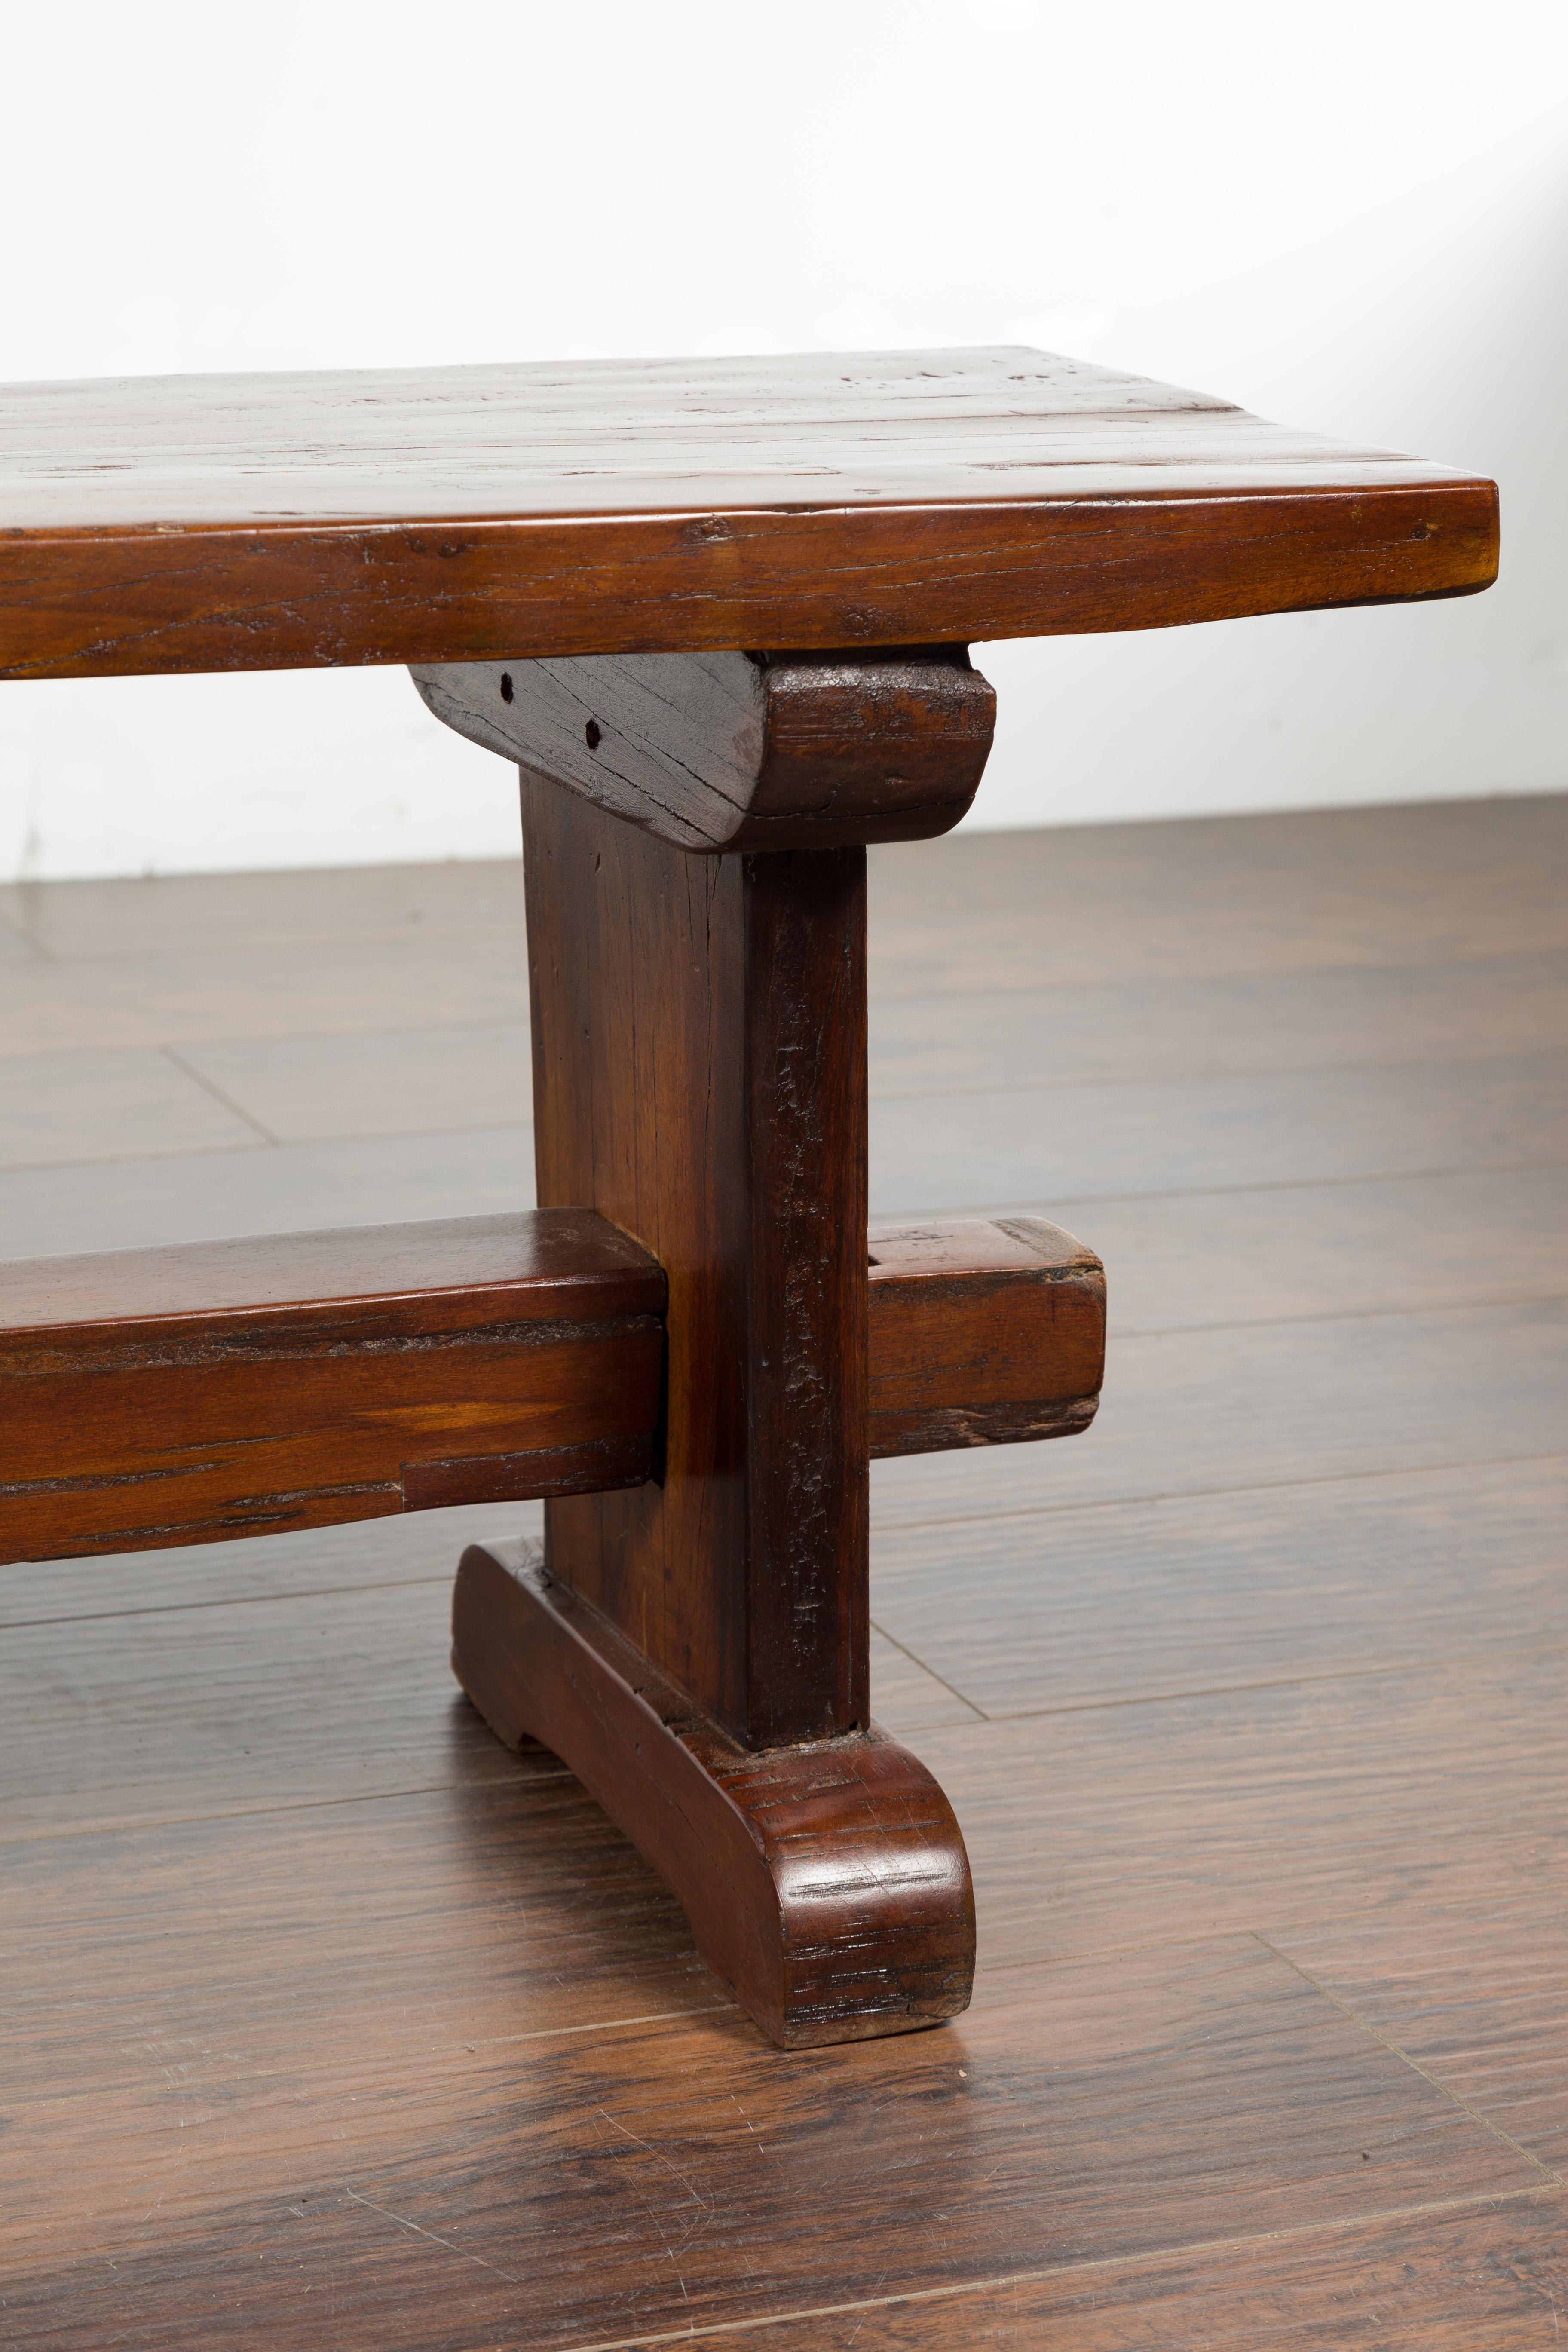 Italian Rustic Walnut Bench with Trestle Base from the Early 19th Century 3